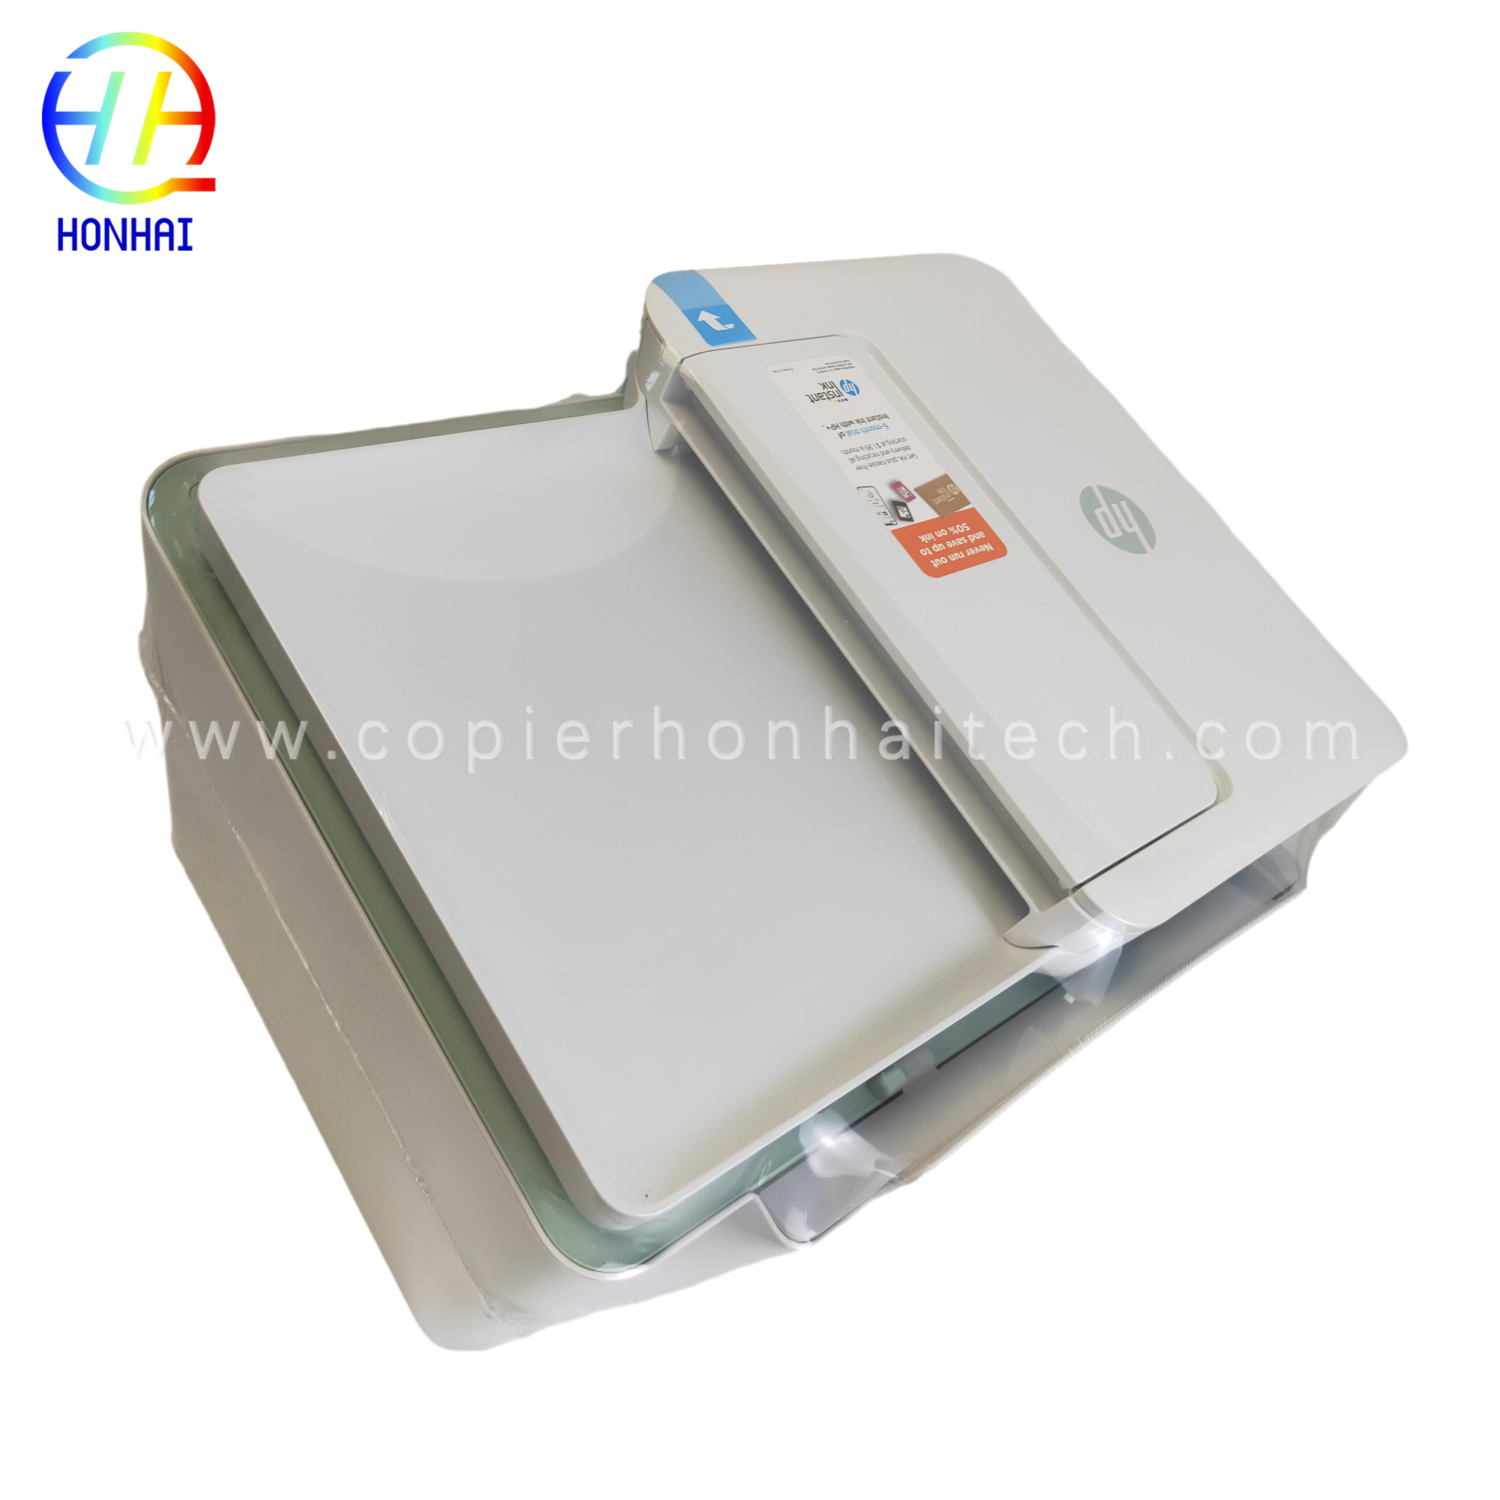 https://www.copierhonhaitech.com/original-new-wireless-printer-for-hp-deskjet-4122e-all-in-one-printer-scan-and-copy-home-office-students-and-home- പ്രിൻ്റർ-26q96a-product/